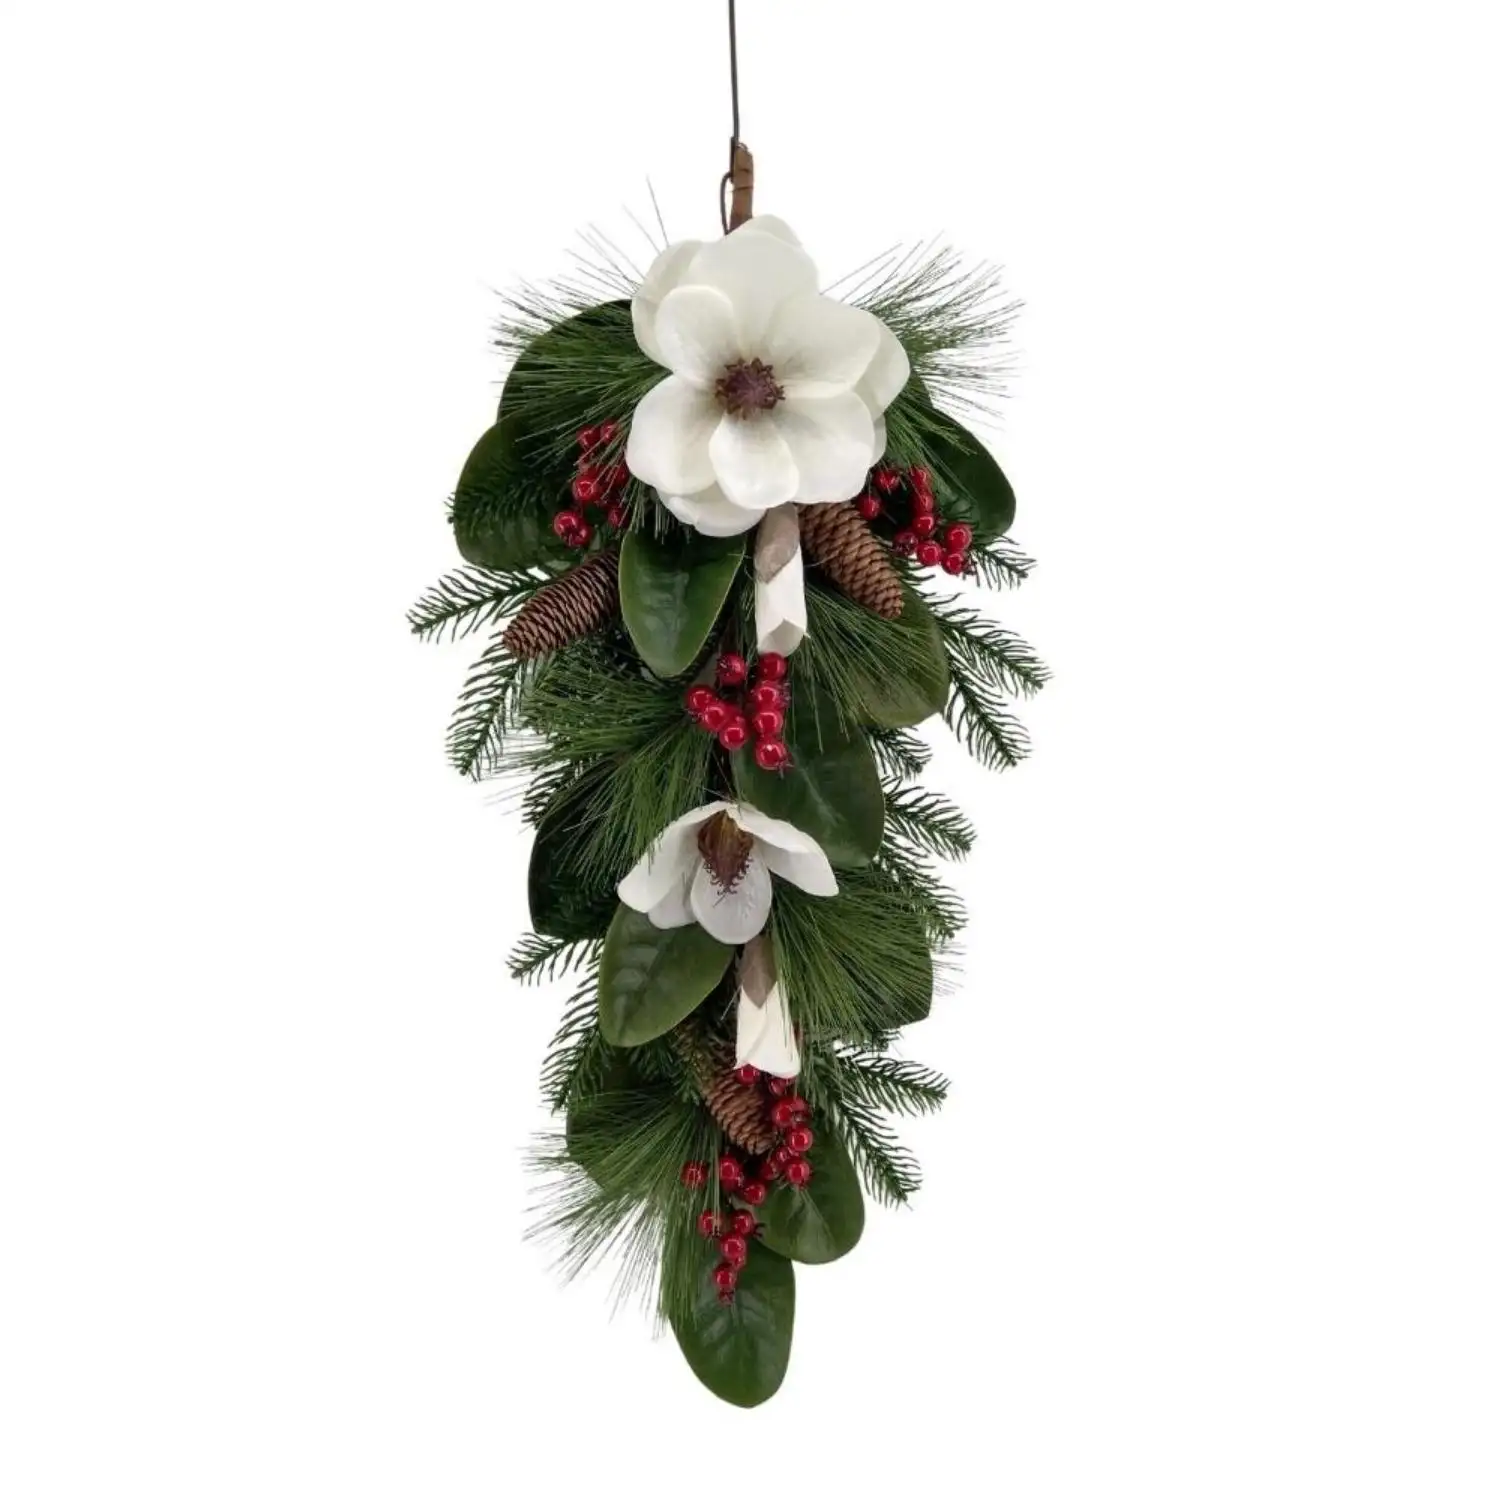 Wholesale Hanging Garland Decoration Snow Pine Wreath Door Magnolia Flower Artificial Leaves Picks Branches Berry Christmas Swag